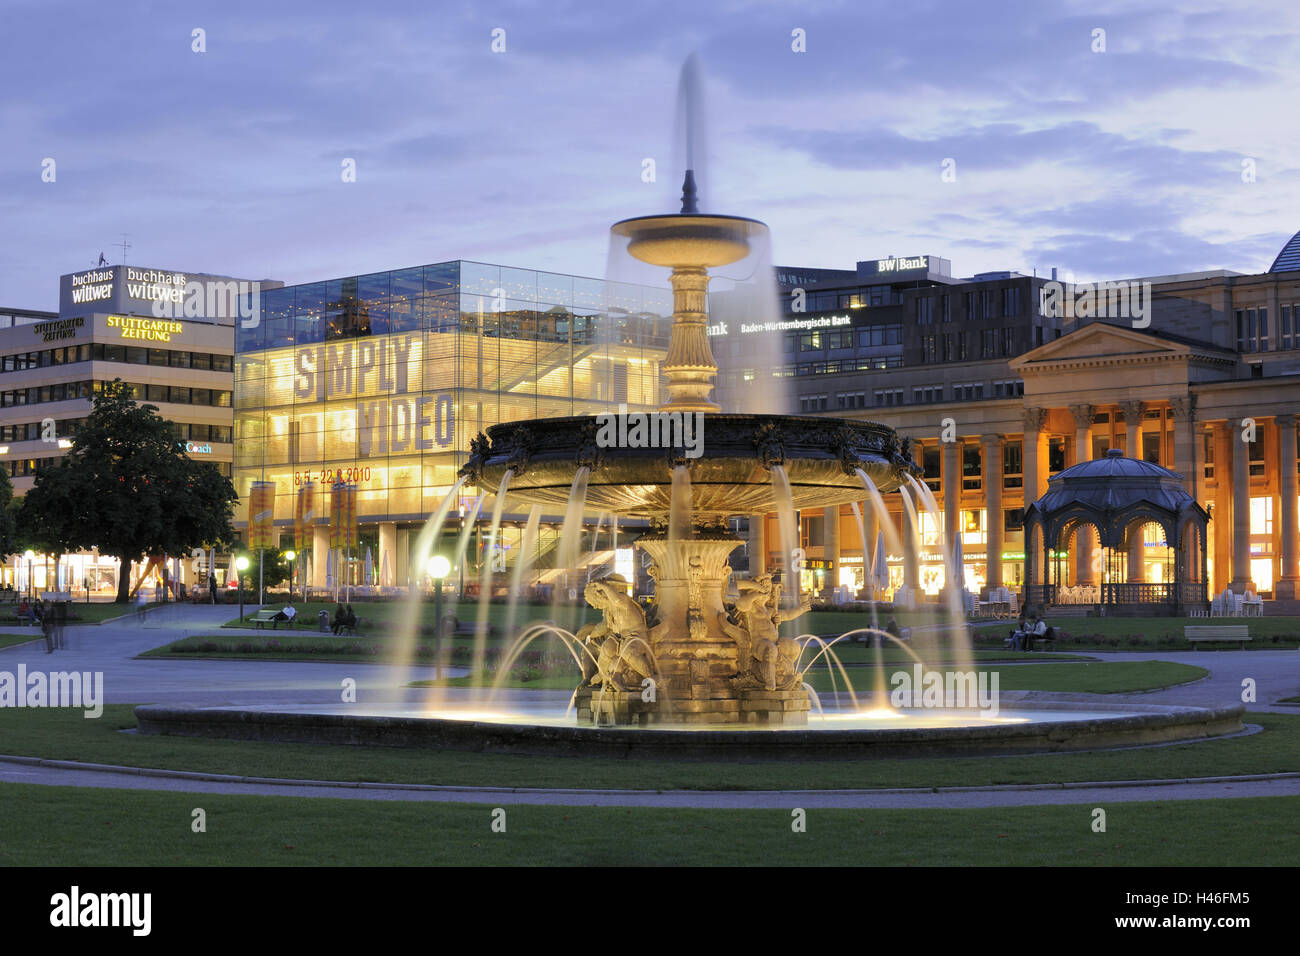 Germany, Baden-Wurttemberg, Stuttgart, castle square, fountain, museum, evening, lighting, architecture, well, culture, play of water, outside, place of interest, tourism, structure, Pureline, destination, illuminateds, water jet, jet, art museum, office Stock Photo